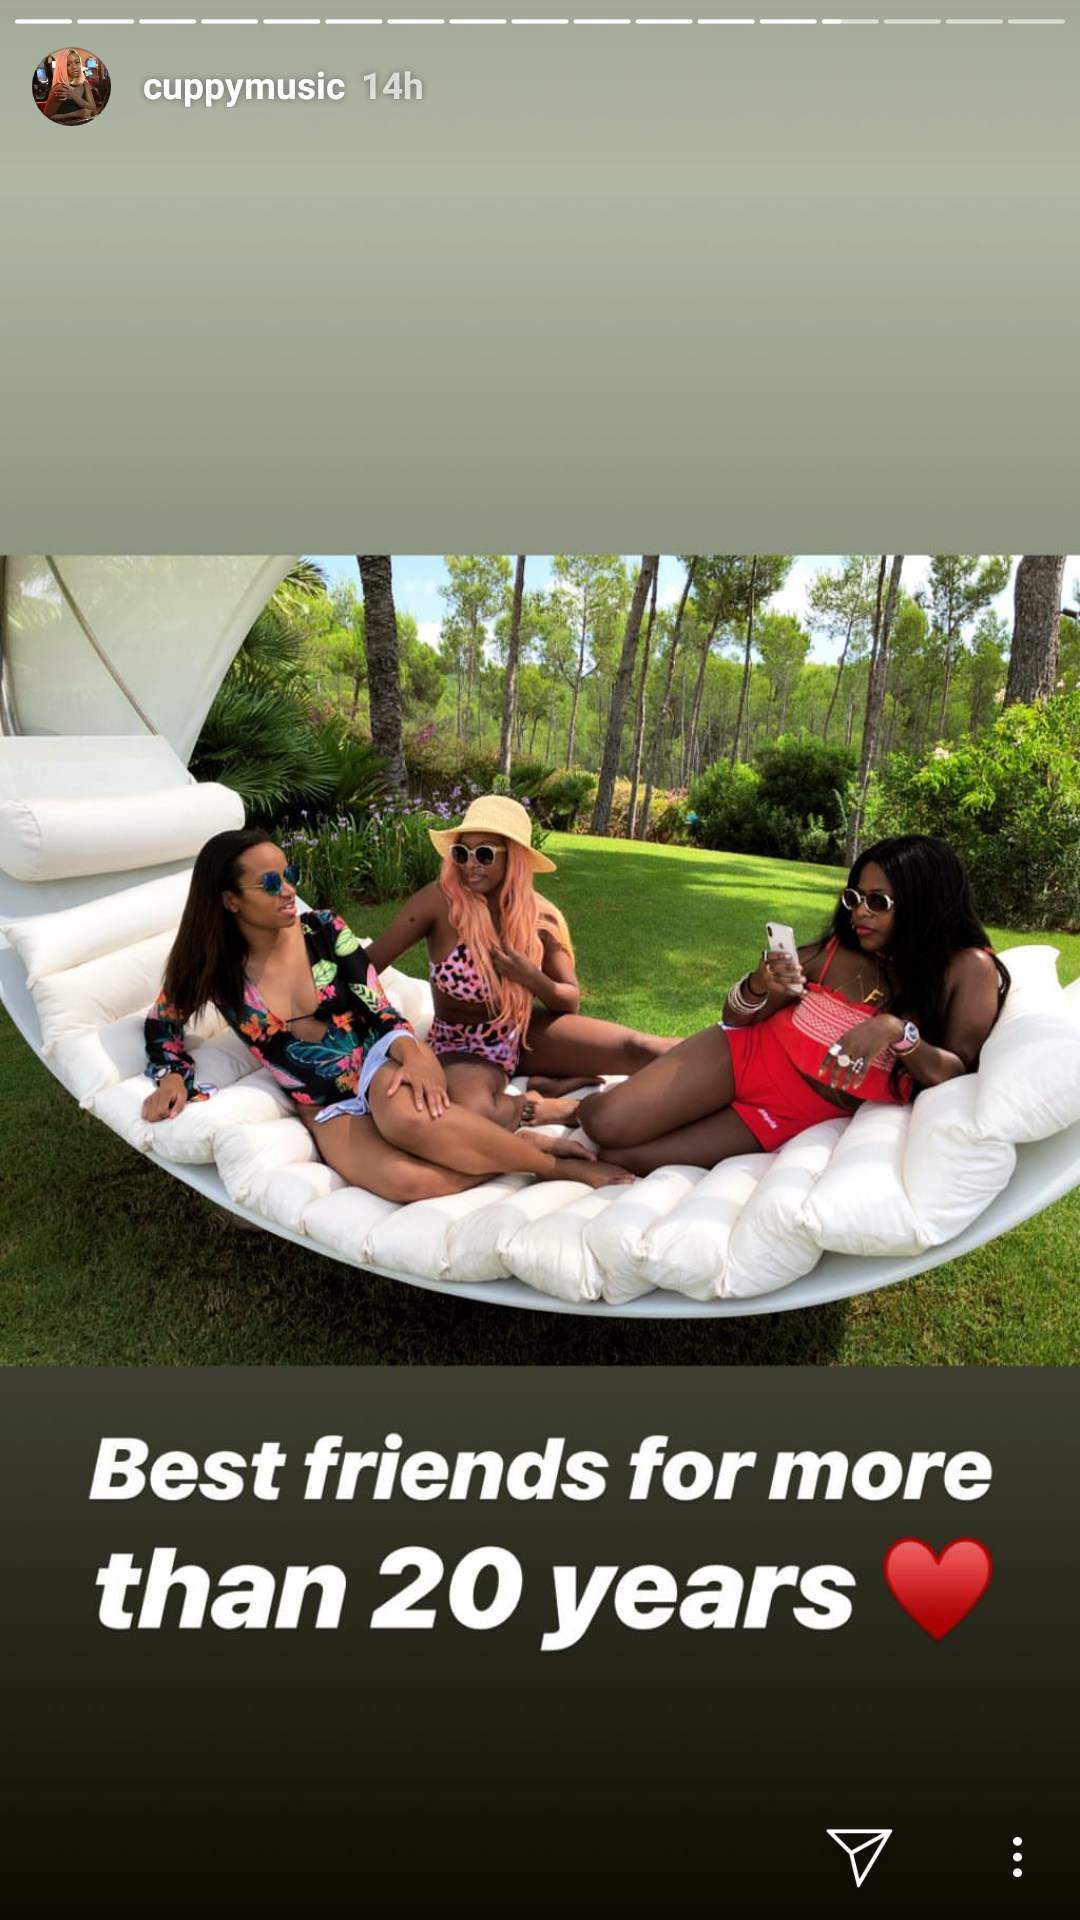 DJ Cuppy Embarks On Her Annual Vacation In Ibiza, Spain With Her Bestfriends (Photos)